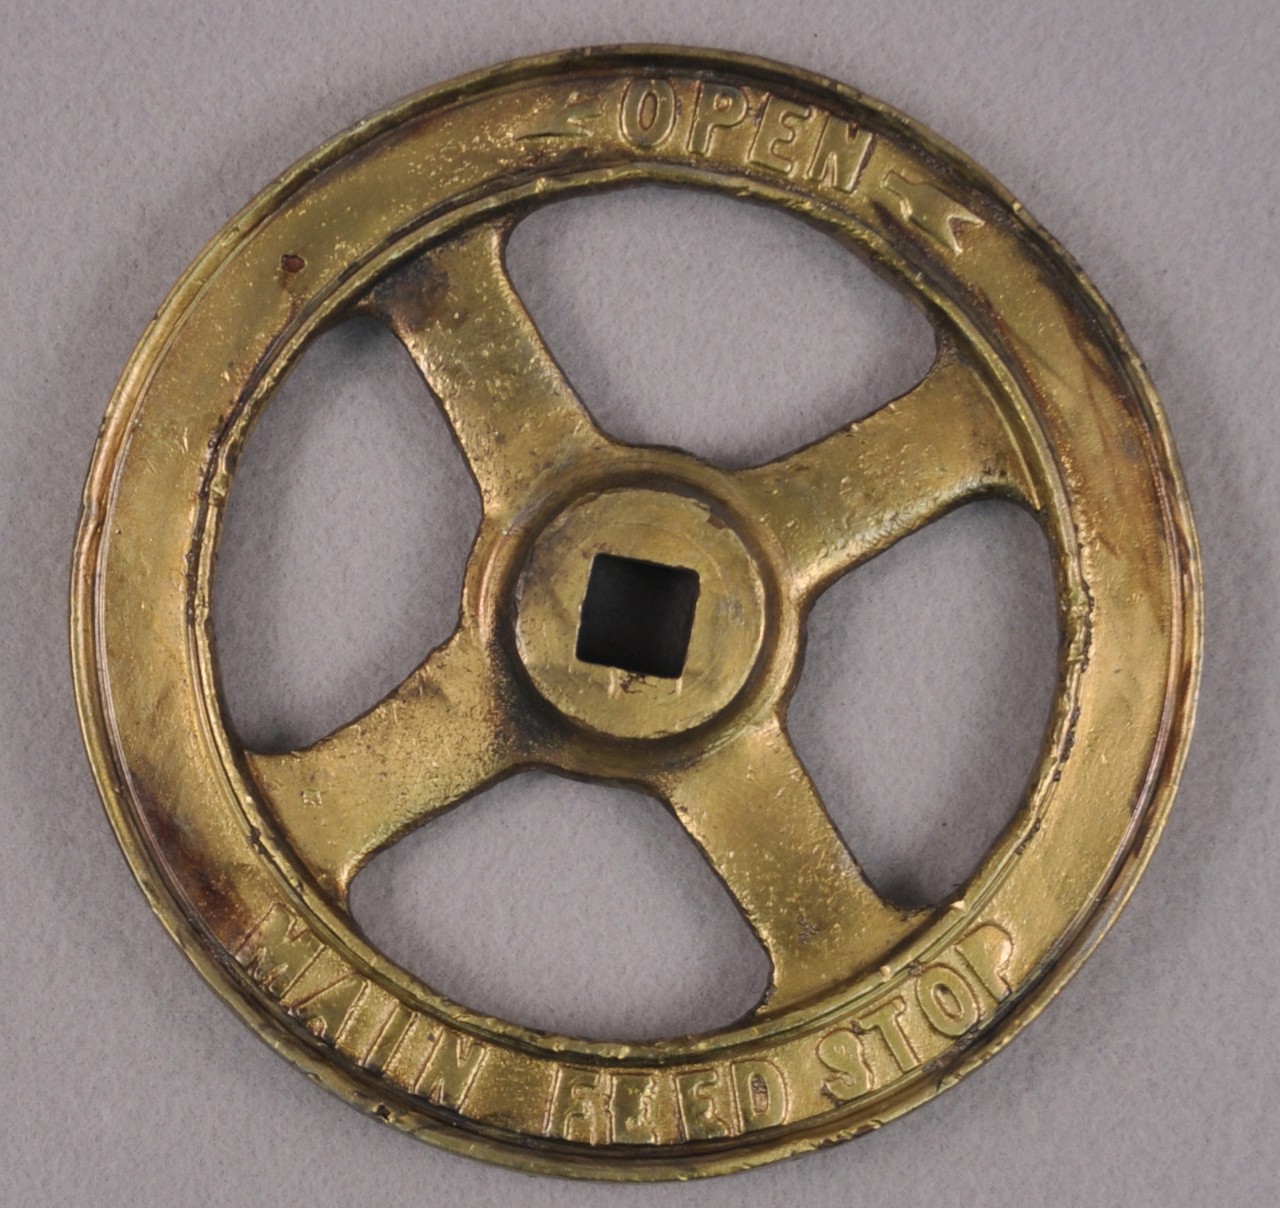 <p>A brass valve wheel with a raised circle in the middle. A square hole is cut in the middle of this circle. At the top of the valve are the words “OPEN” with an arrow point left and the words at the bottom are the words “Main Feed Stop”.</p>